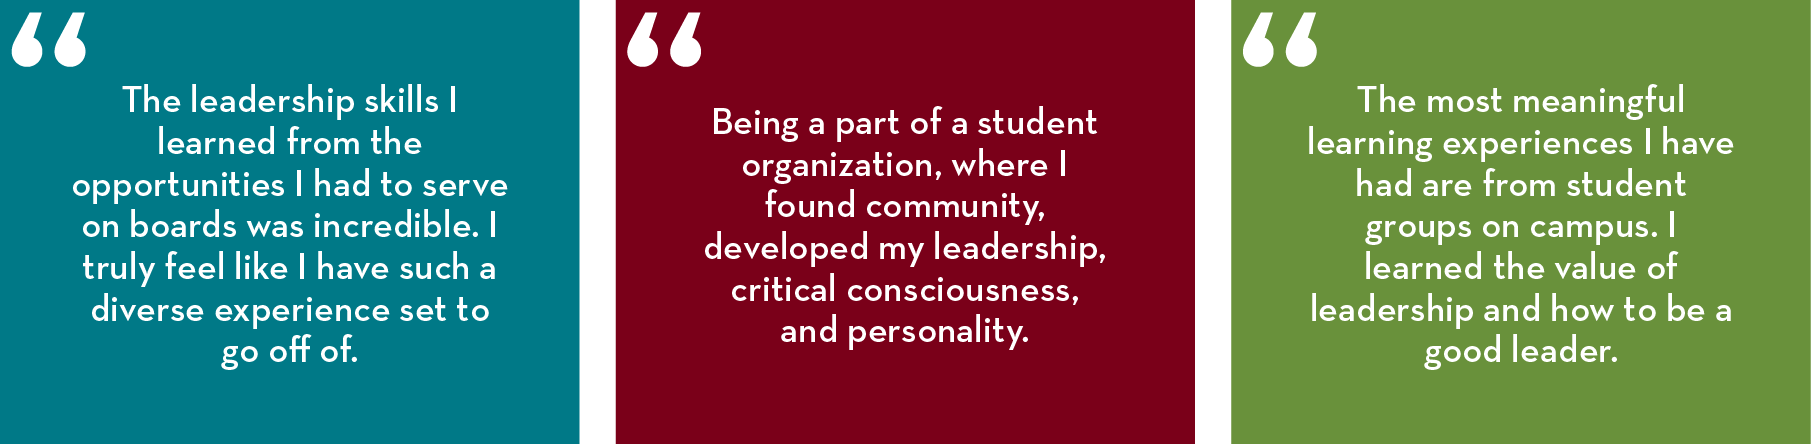 “The leadership skills I learned from the opportunities I had to serve on boards was incredible. I truly feel like I have such a diverse experience set to go off of.”  “Being a part of a student organization, where I found community, developed my leadersh